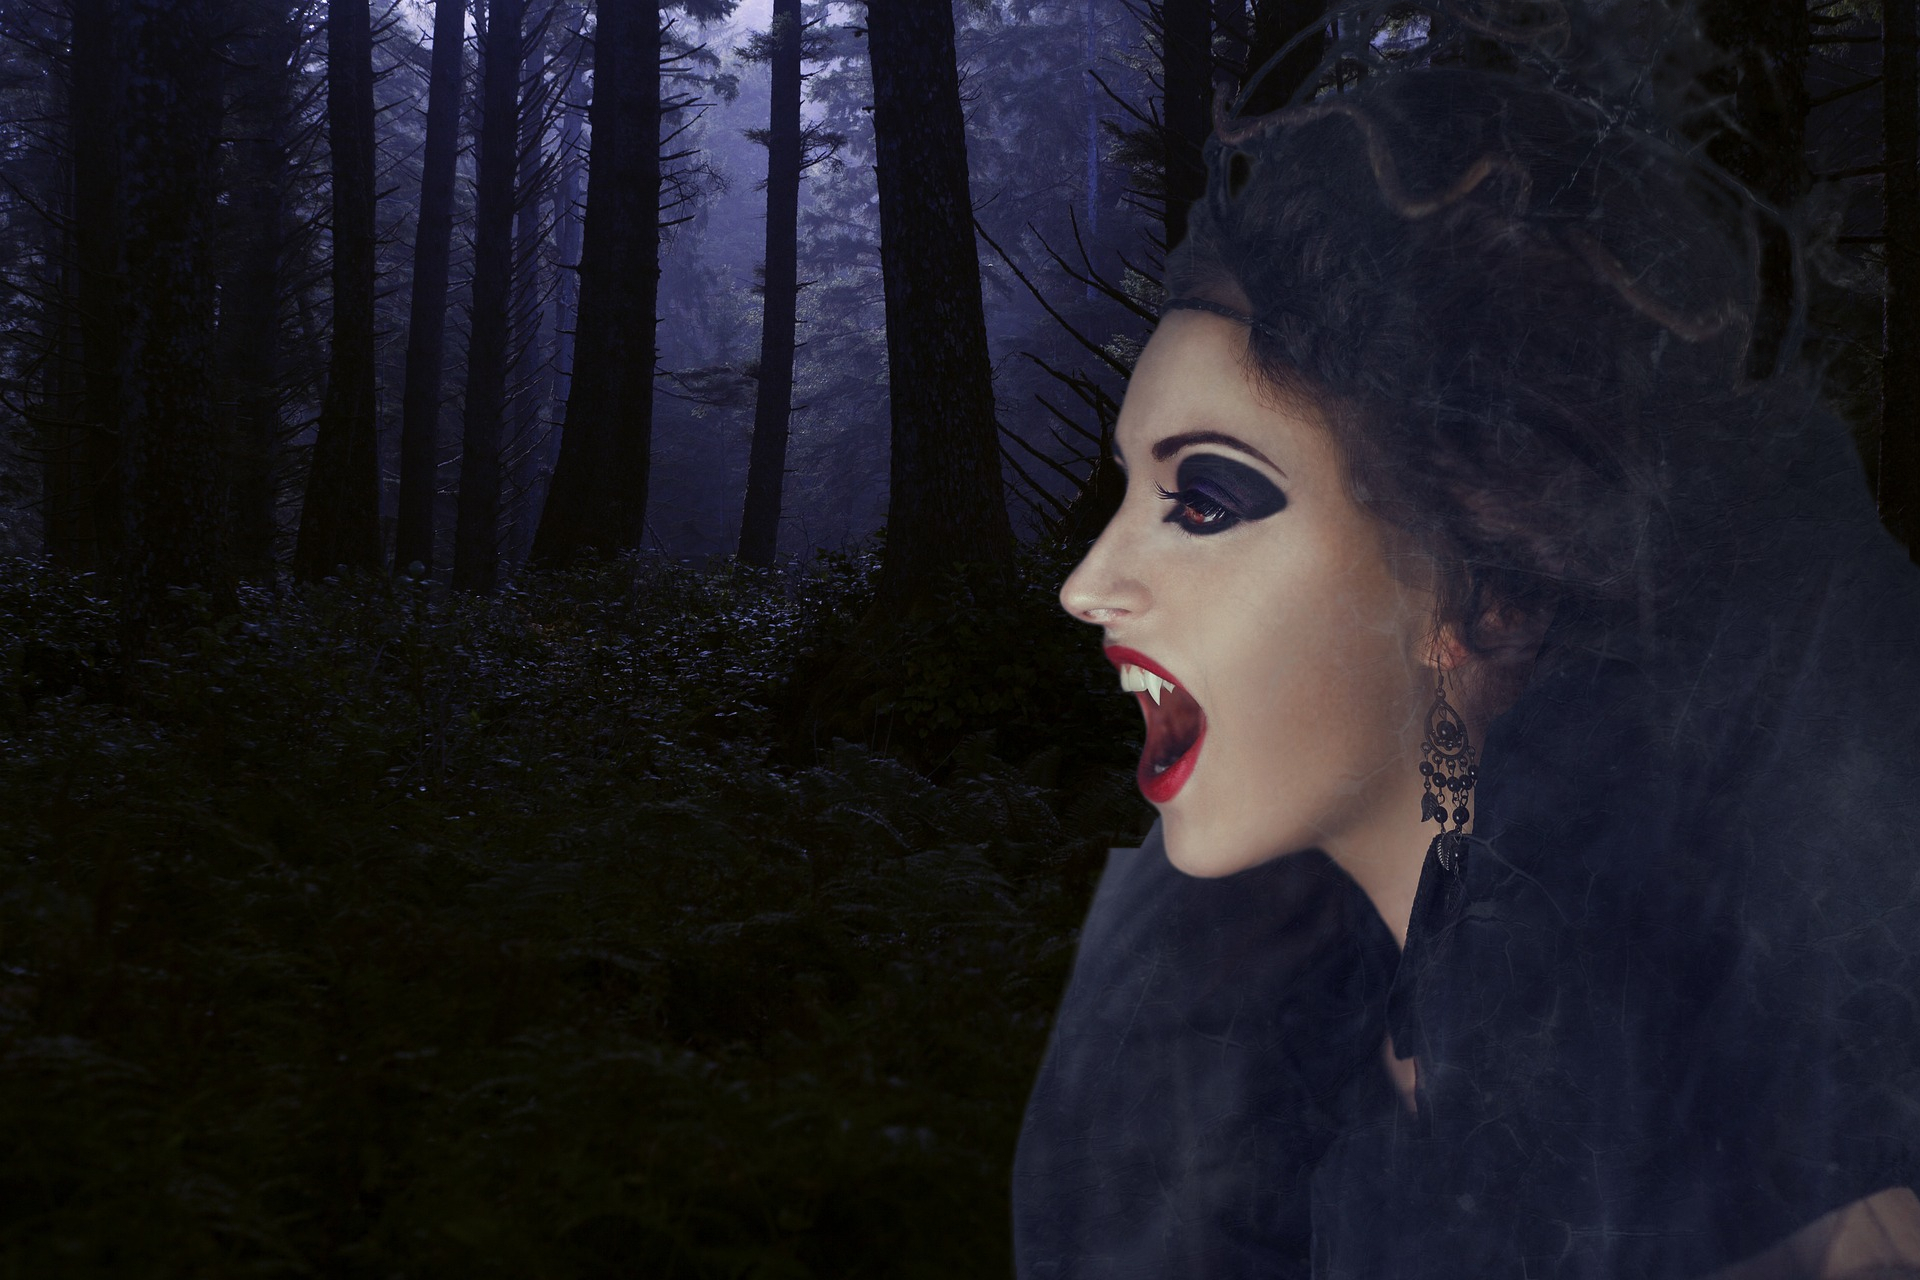 Vampiress stalks a camping couple in the forest ready to load up on energy sustaining blood!